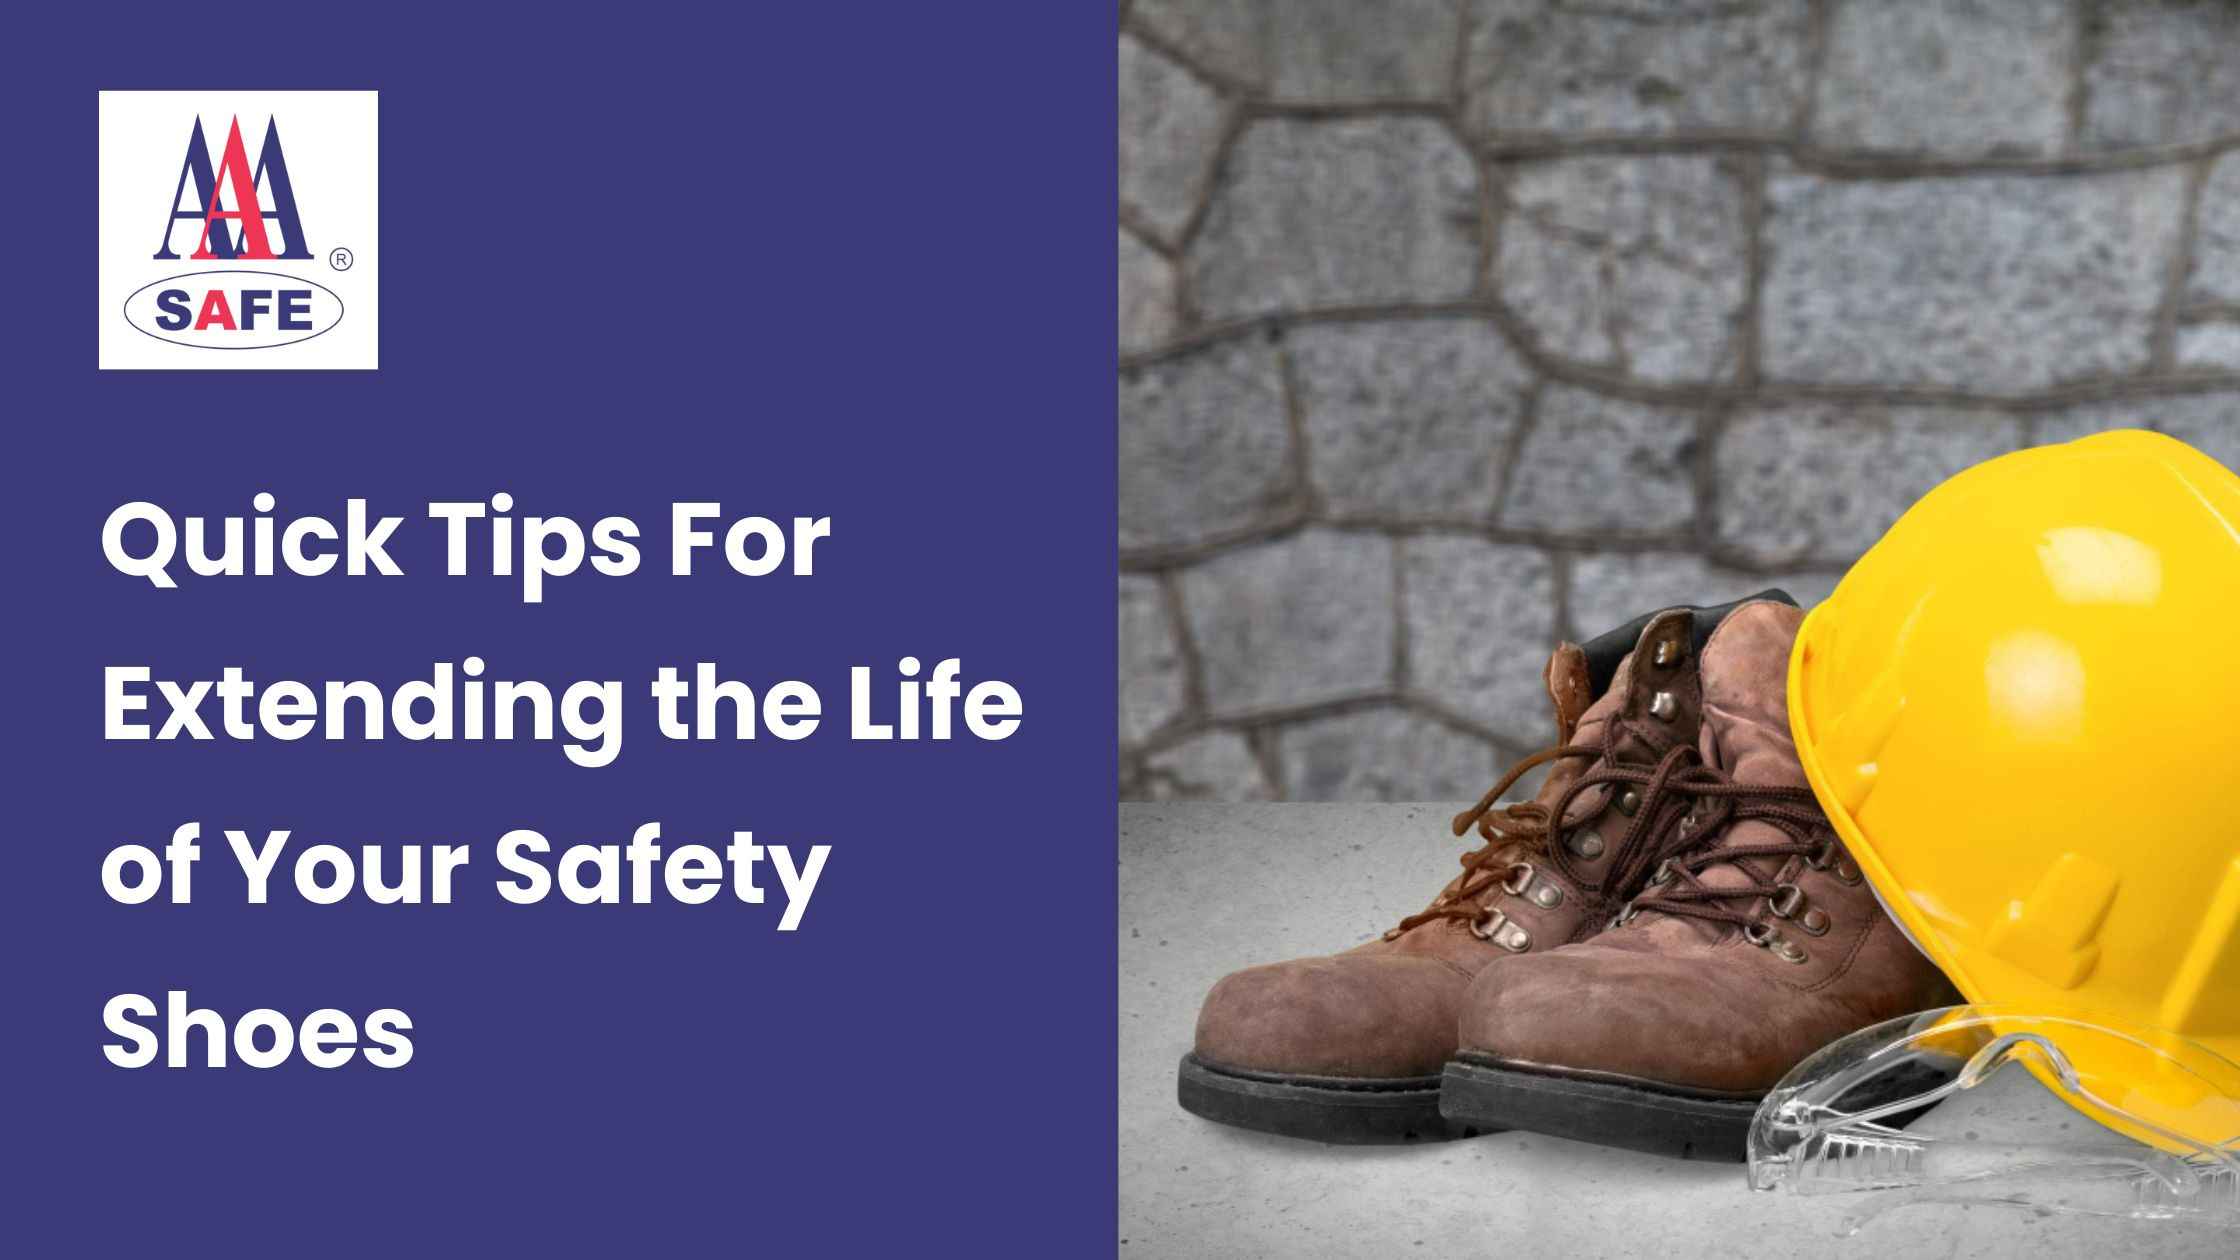 Quick Tips For Extending the Life of Your Safety Shoes